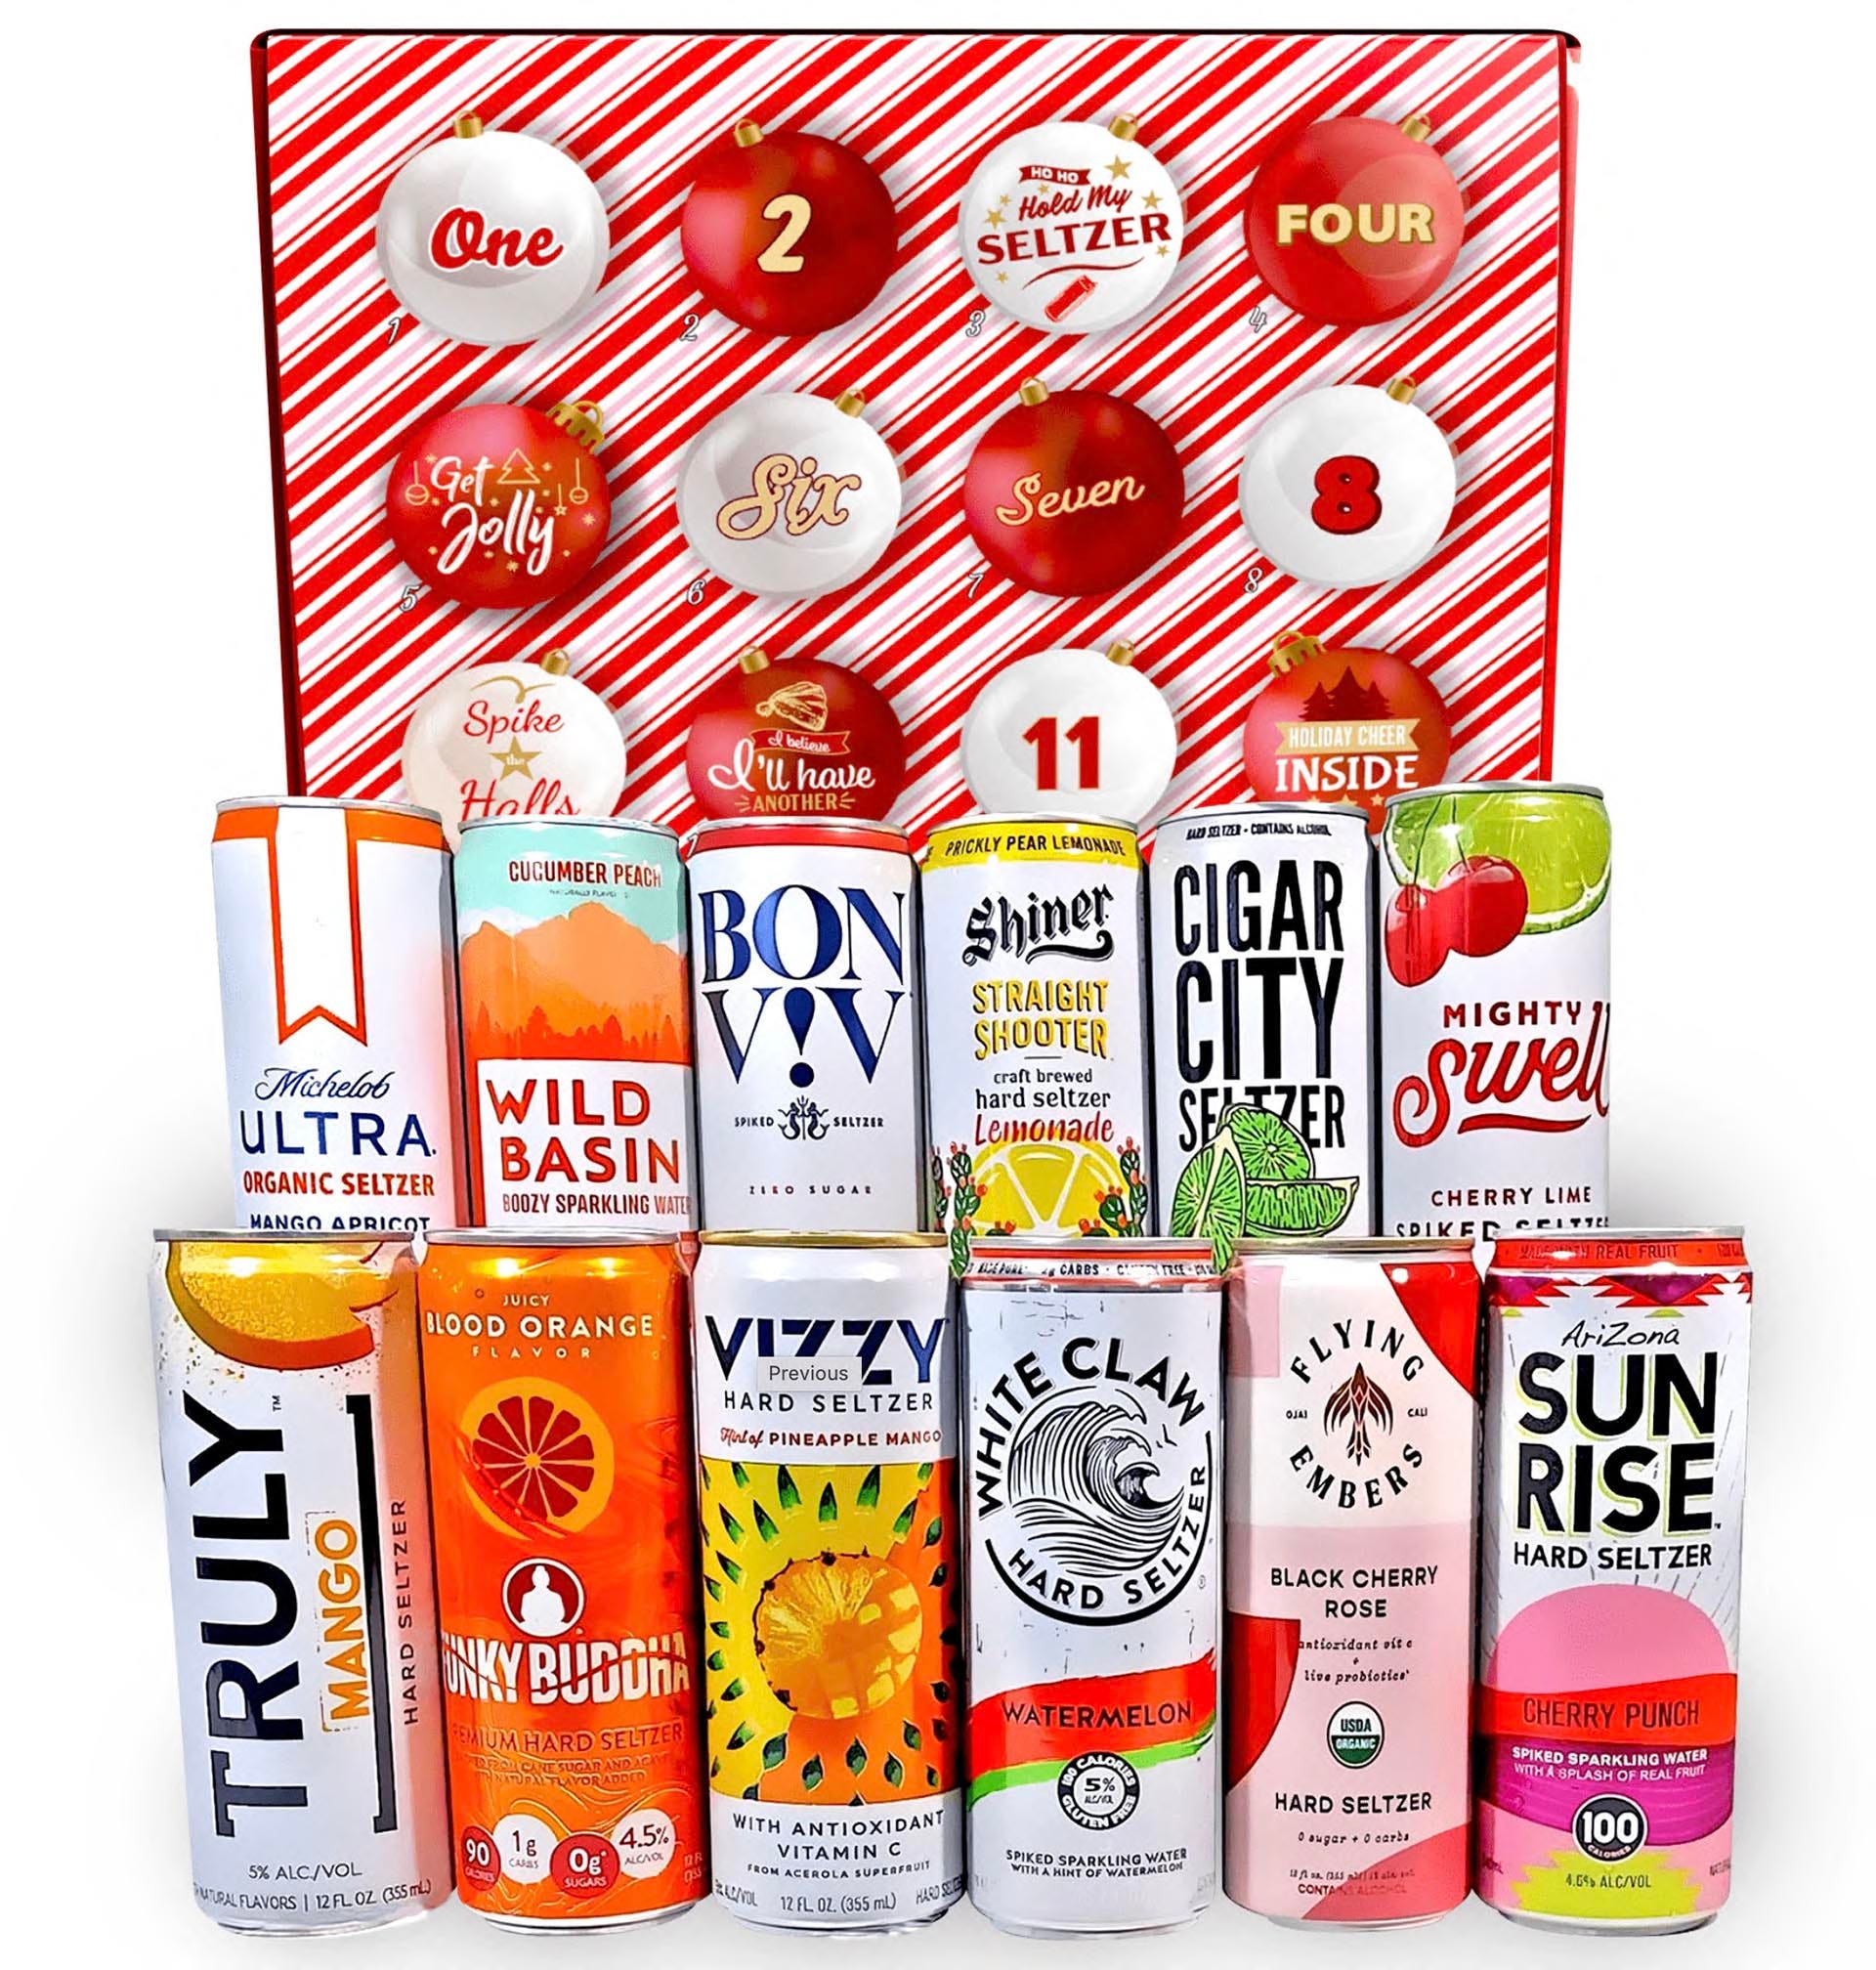 This Advent calendar offers big name brands like White Claw along with smaller hard seltzer producers